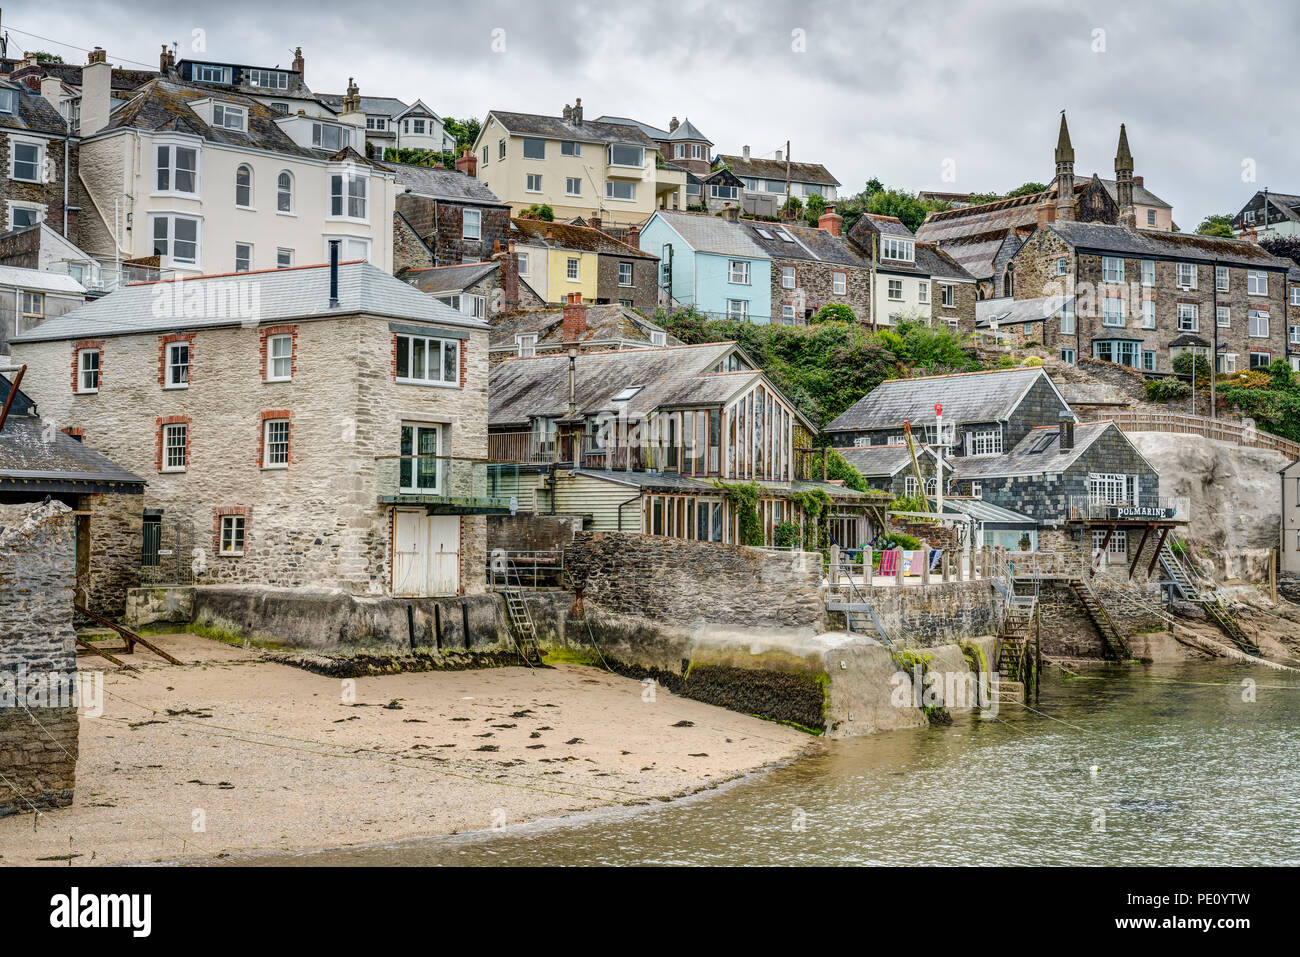 A typical Cornish landscape picture of the small beach at Polruan quayside on the Fowey Estuary surrounded by old marine buildings and village homes. Stock Photo